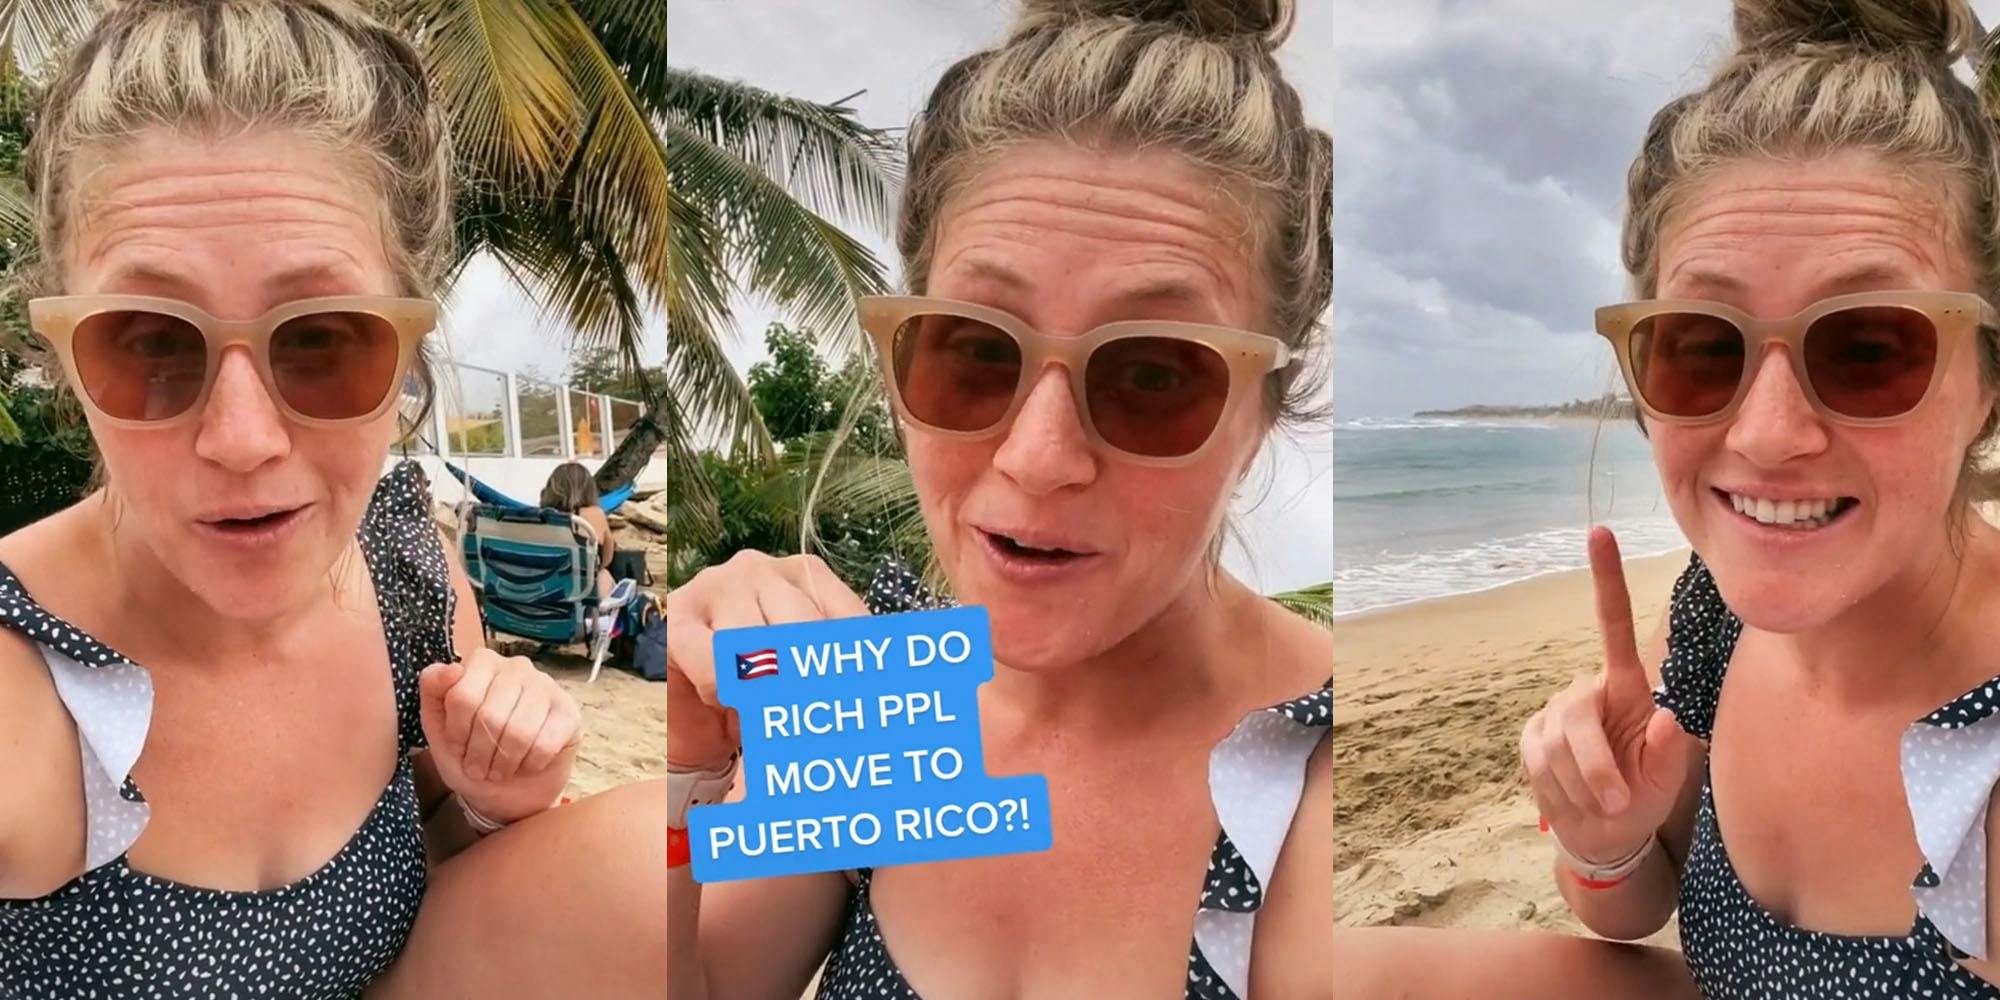 Woman at beach talking (l) woman at beach speaking pointing to caption "WHY DO RICH PPL MOVE TO PUERTO RICO?!" (c) woman at beach speaking pointing finger up (r)